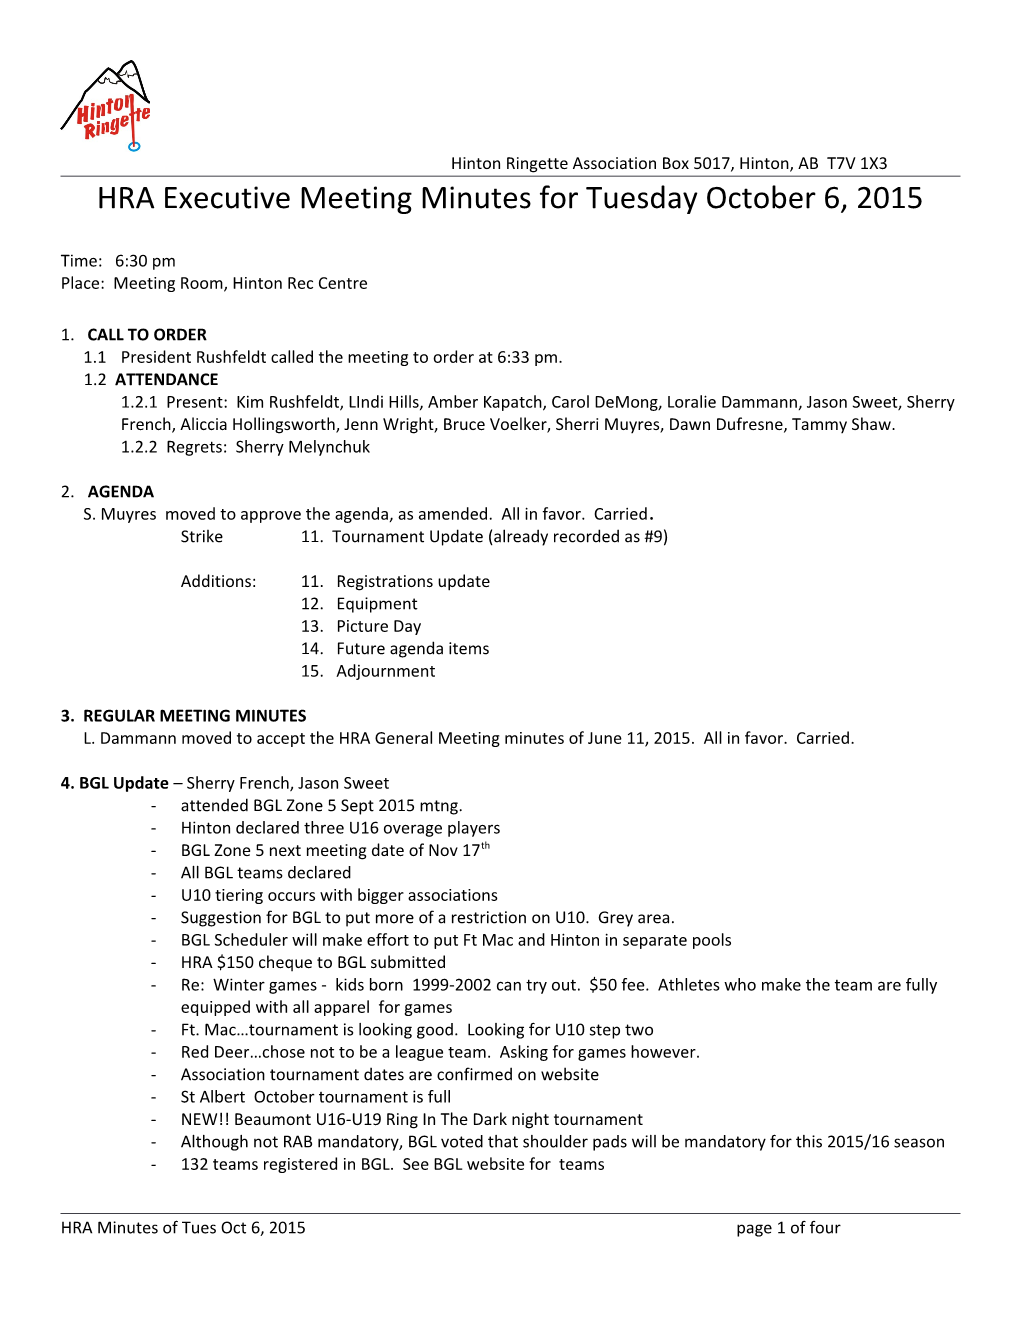 HRA Executive Meeting Minutes Fortuesday October 6, 2015